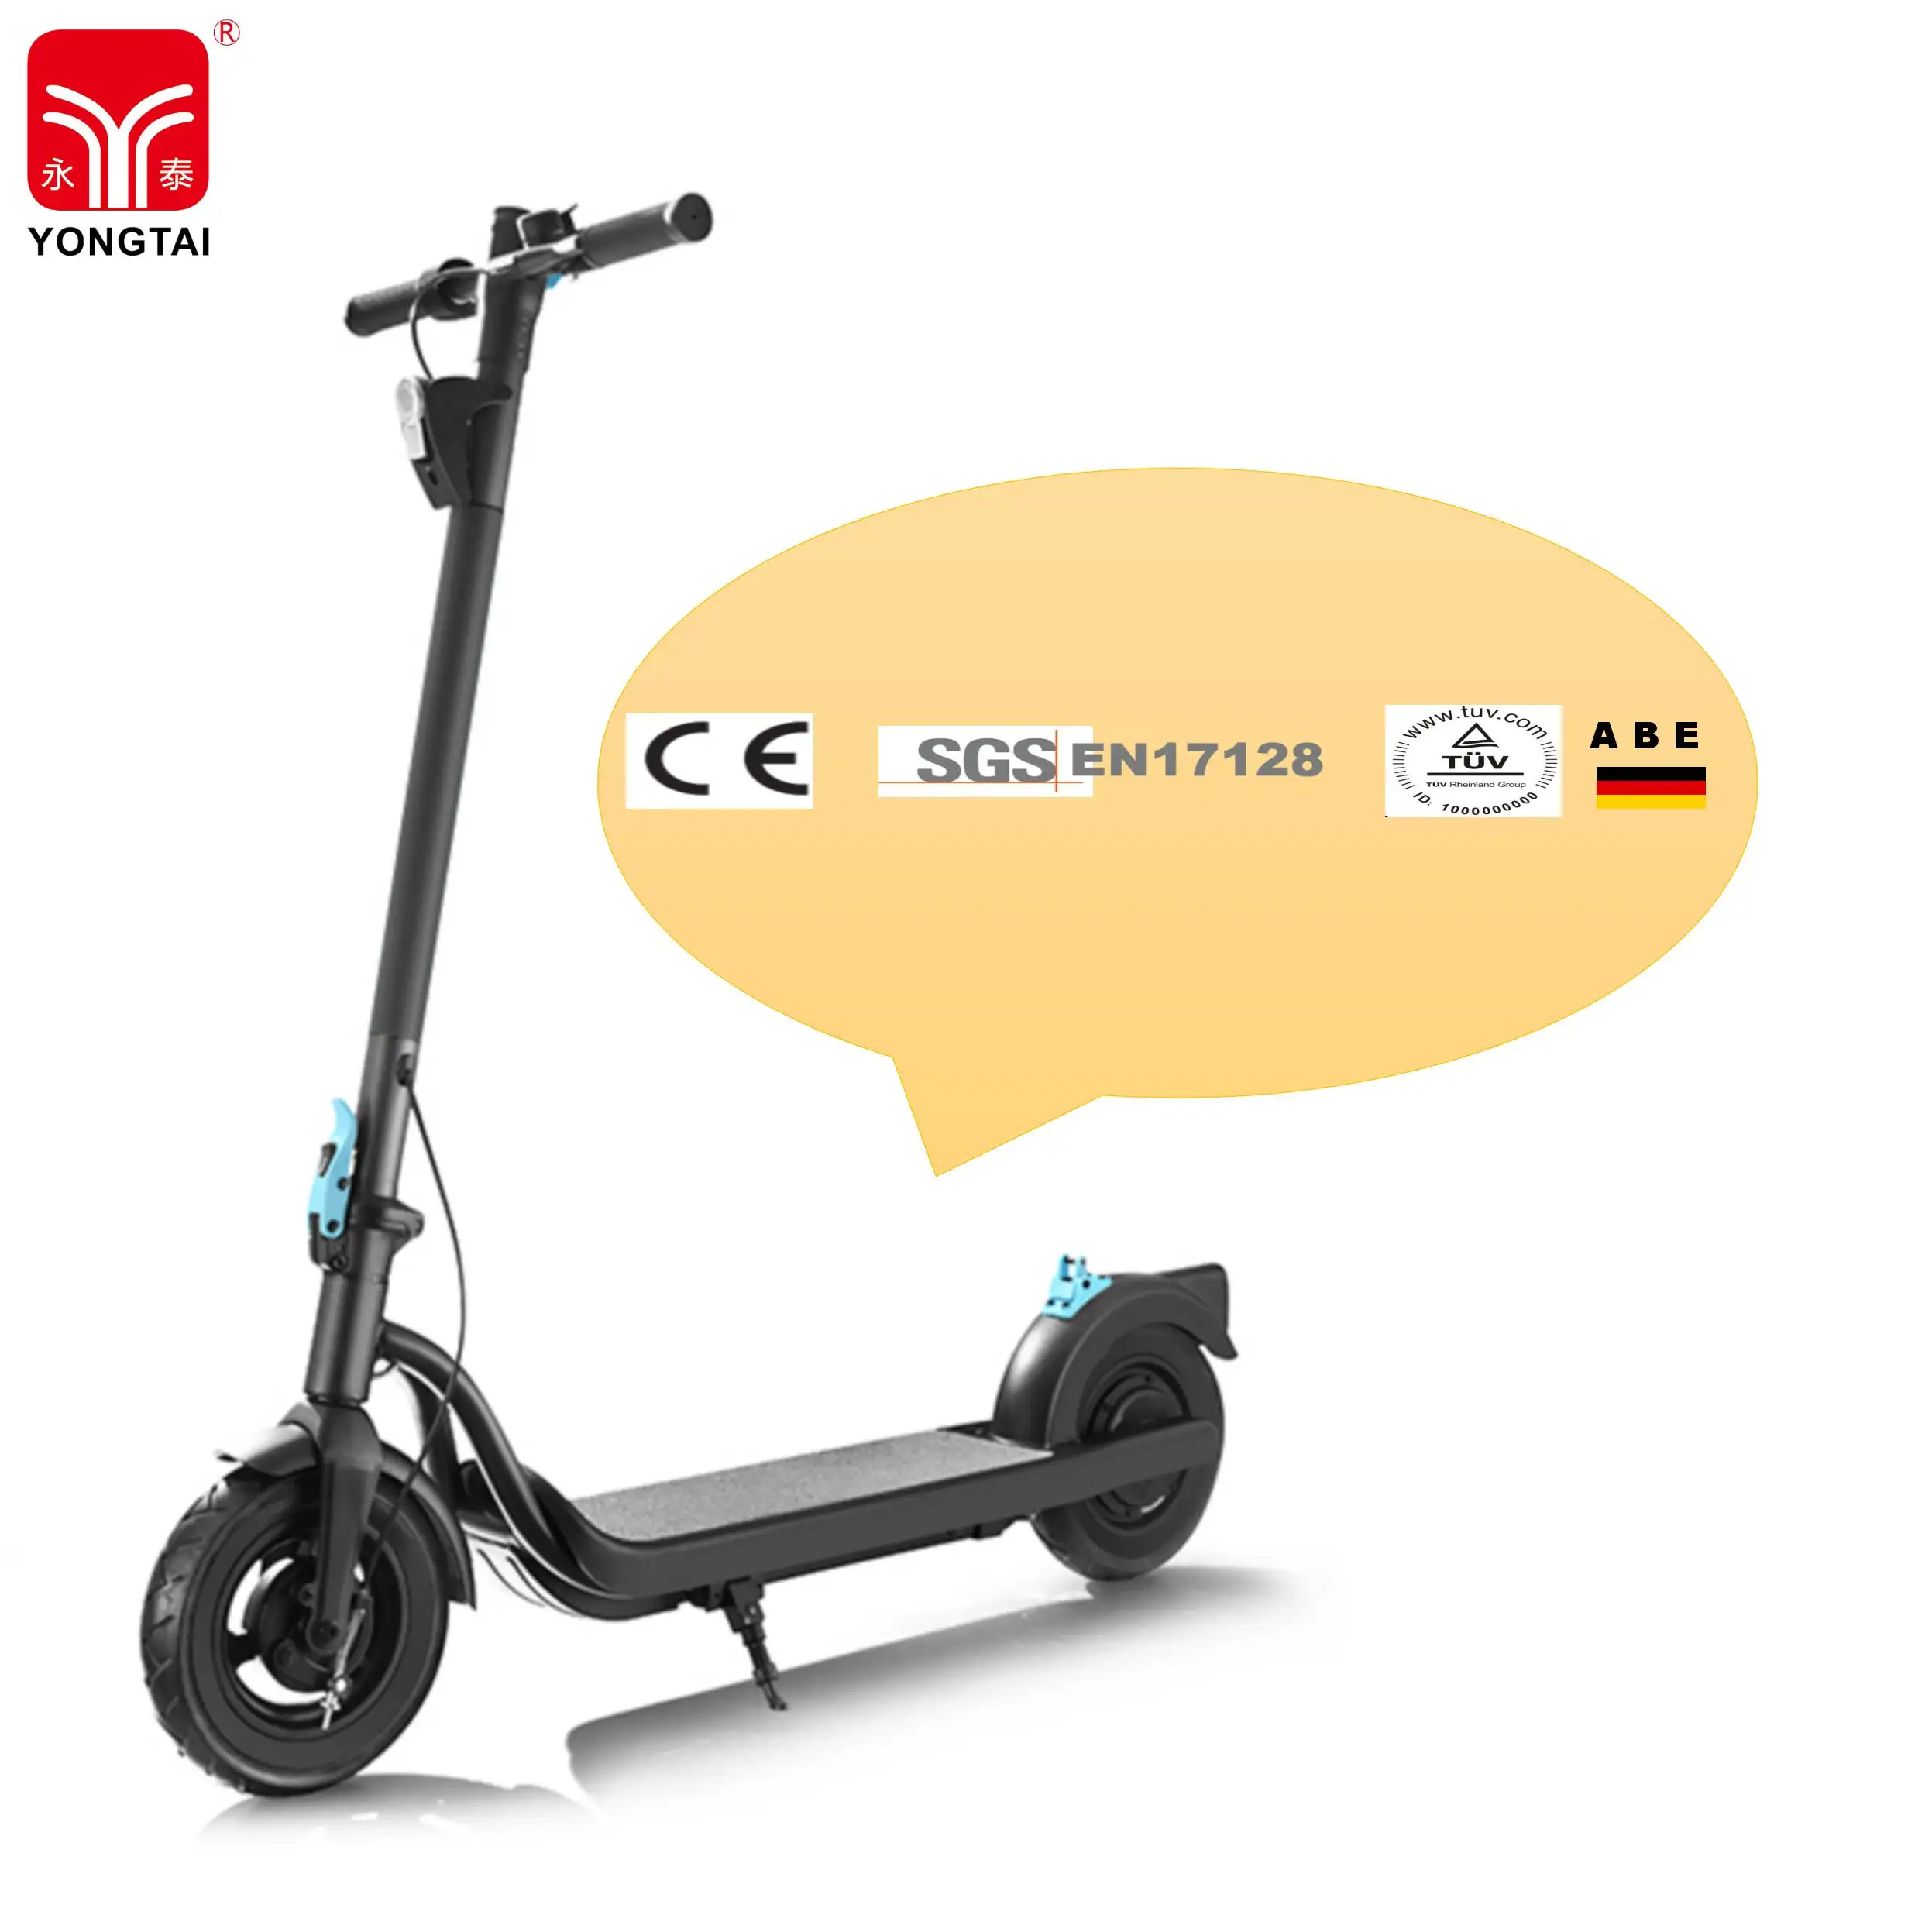 Hot Yongtai Ryitgo electric scooter 2022 New Folding electric scooter 120kg load 10 inch 2 wheeL electric motorcycle scooter